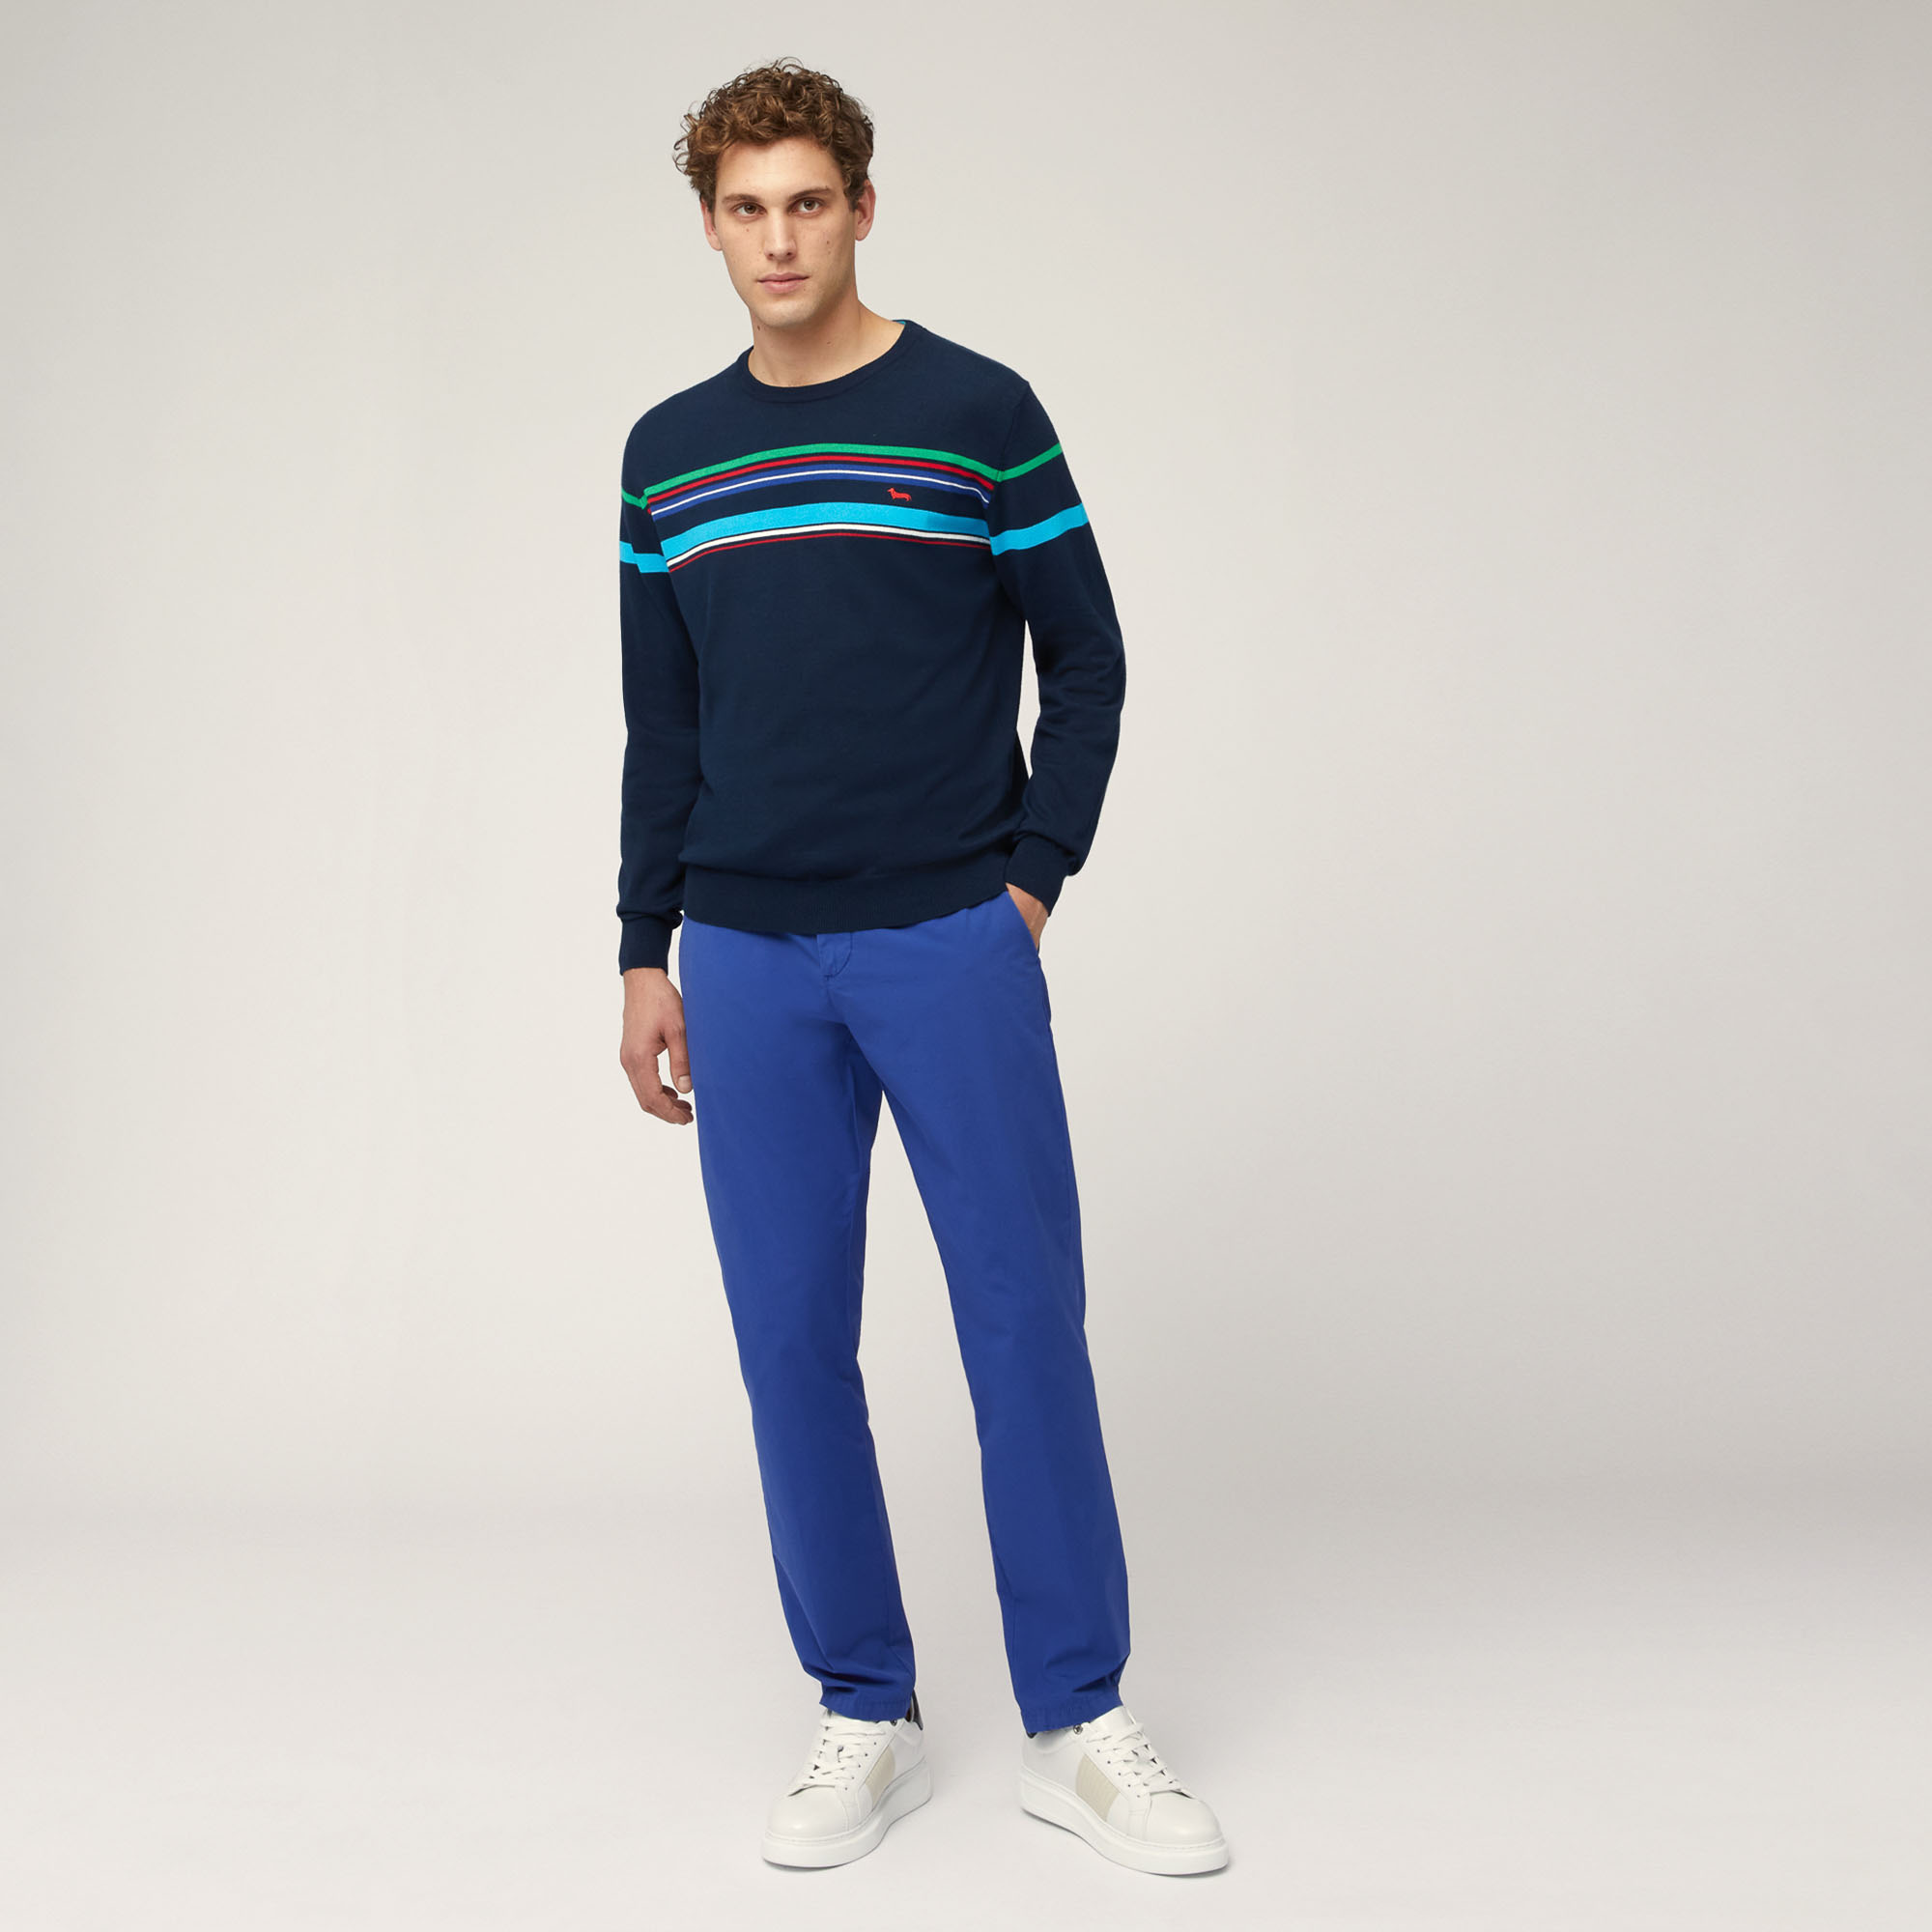 Organic Cotton Crew Neck Pullover with Color Block Stripes, Night Blue, large image number 3